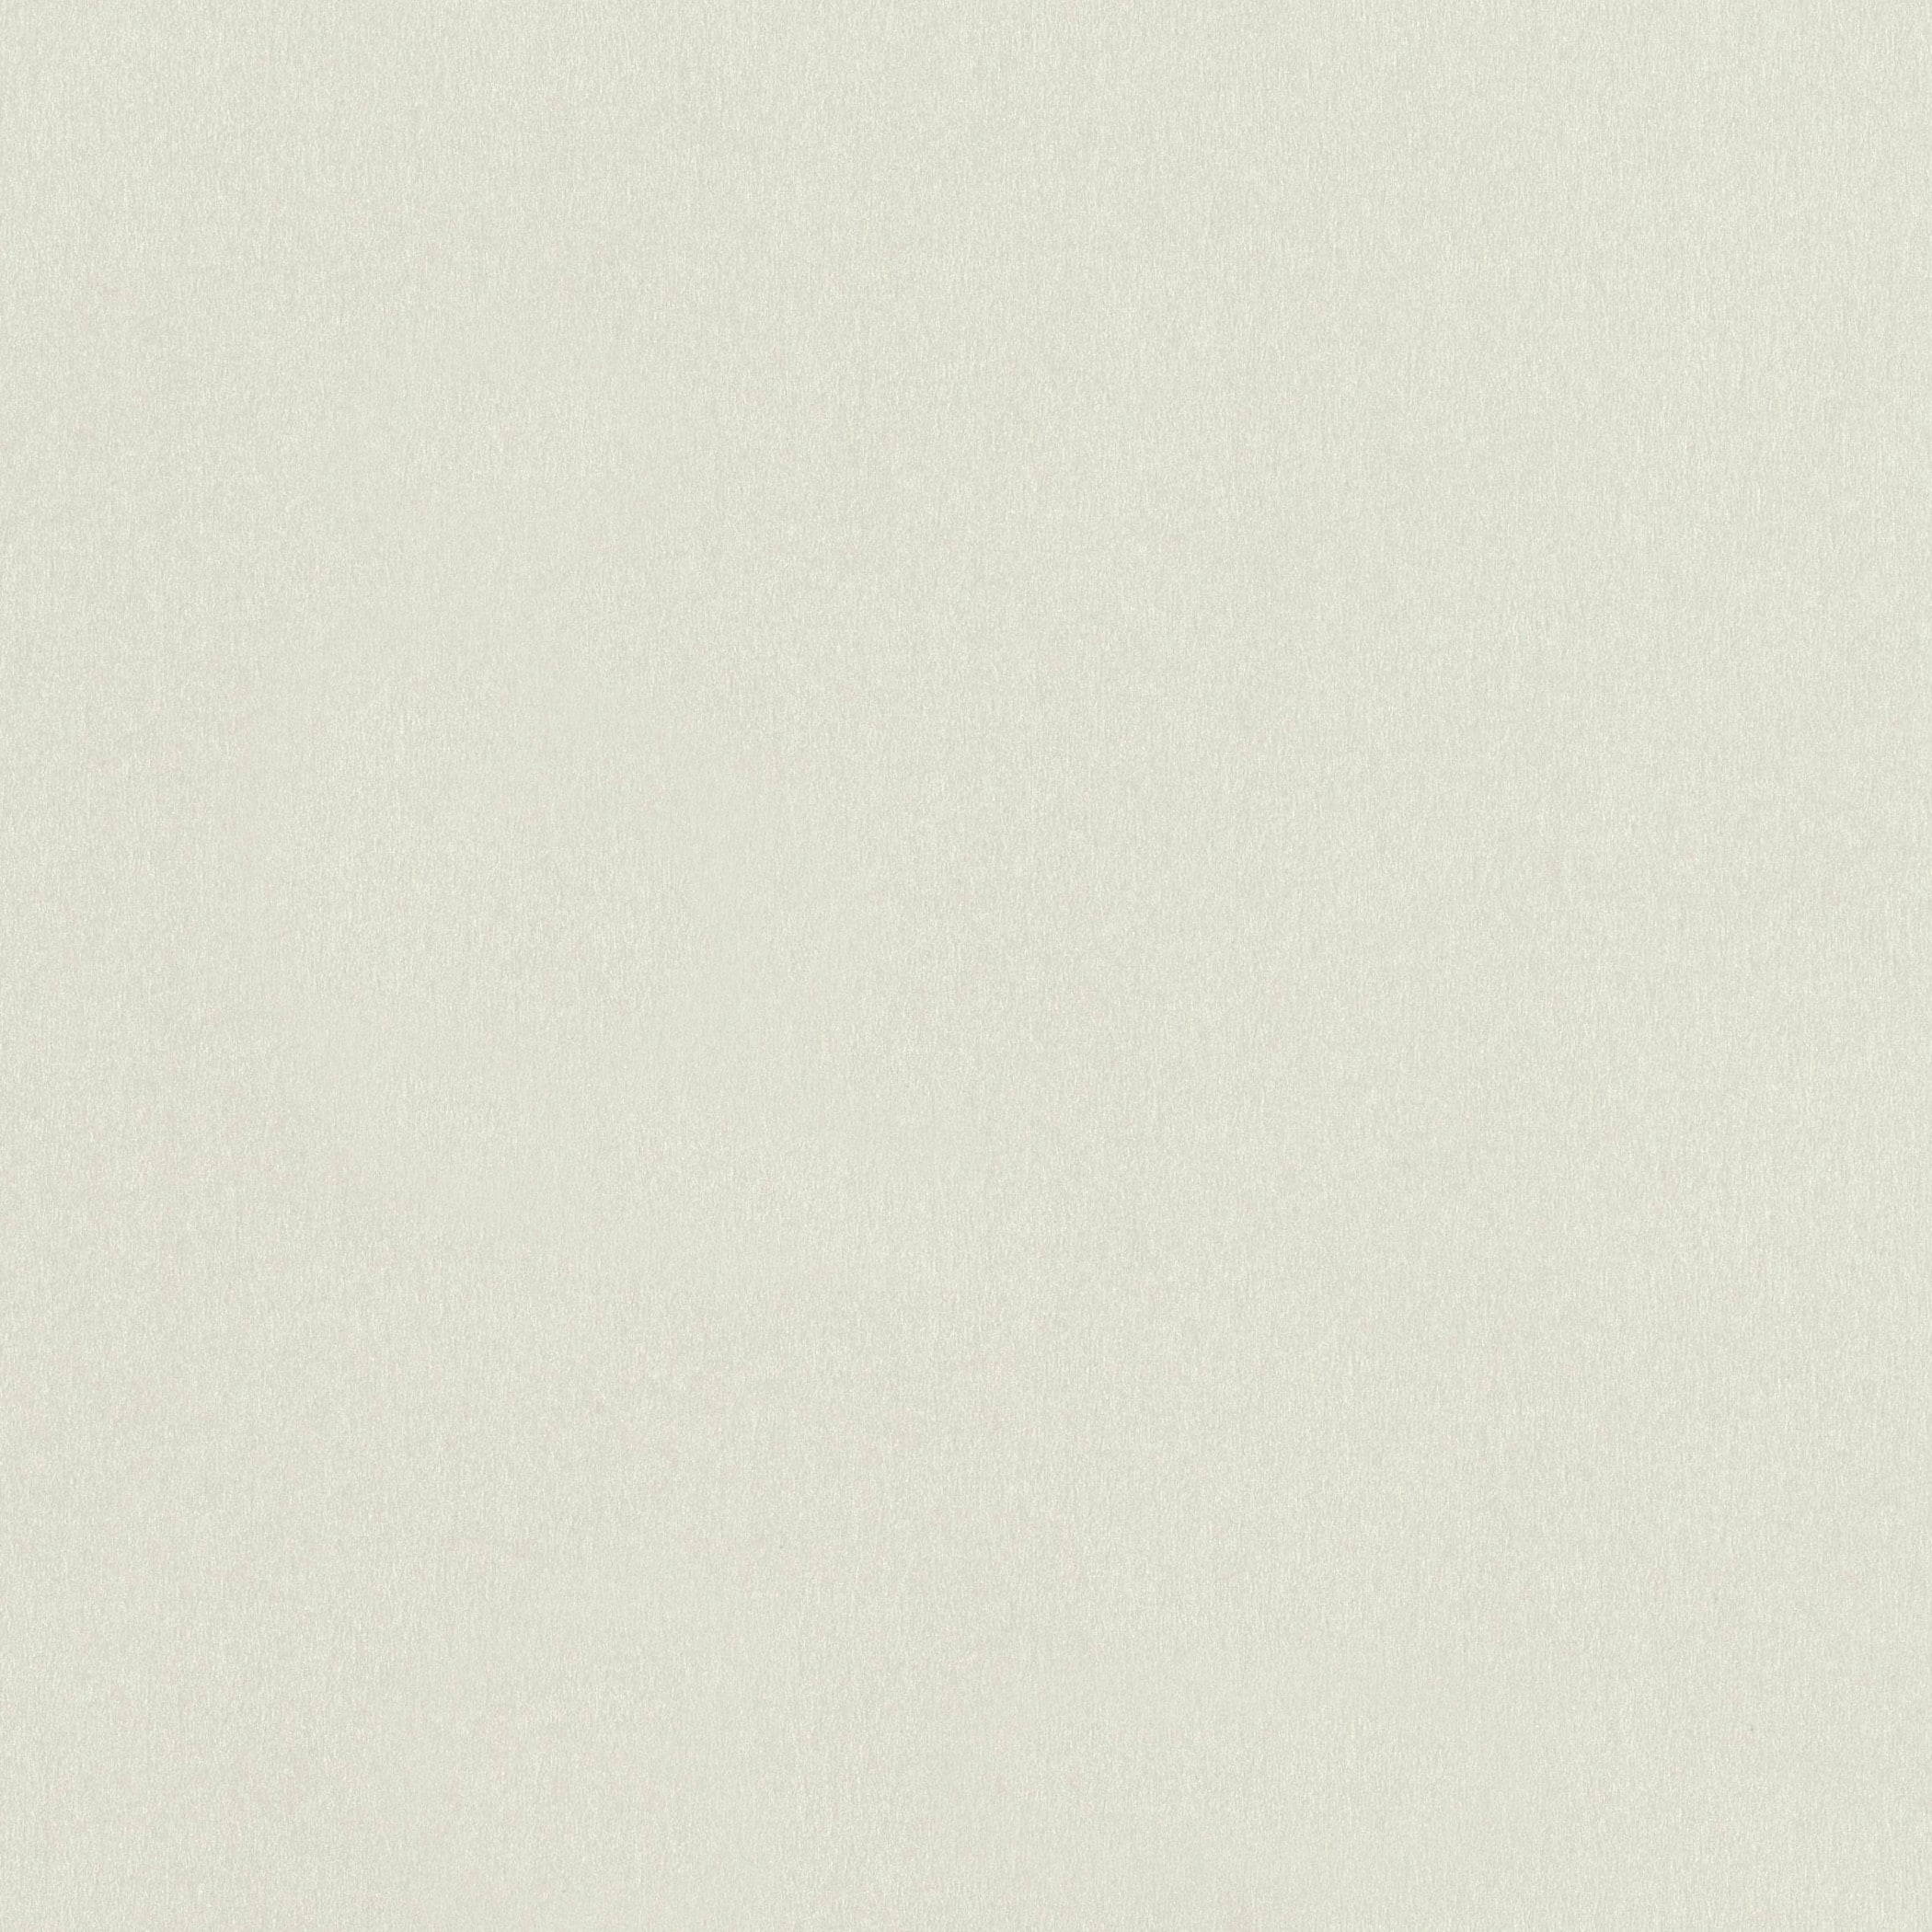 Champagne Metallic 107lb. 12 x 12 Cardstock - 50 Pack - by Jam Paper